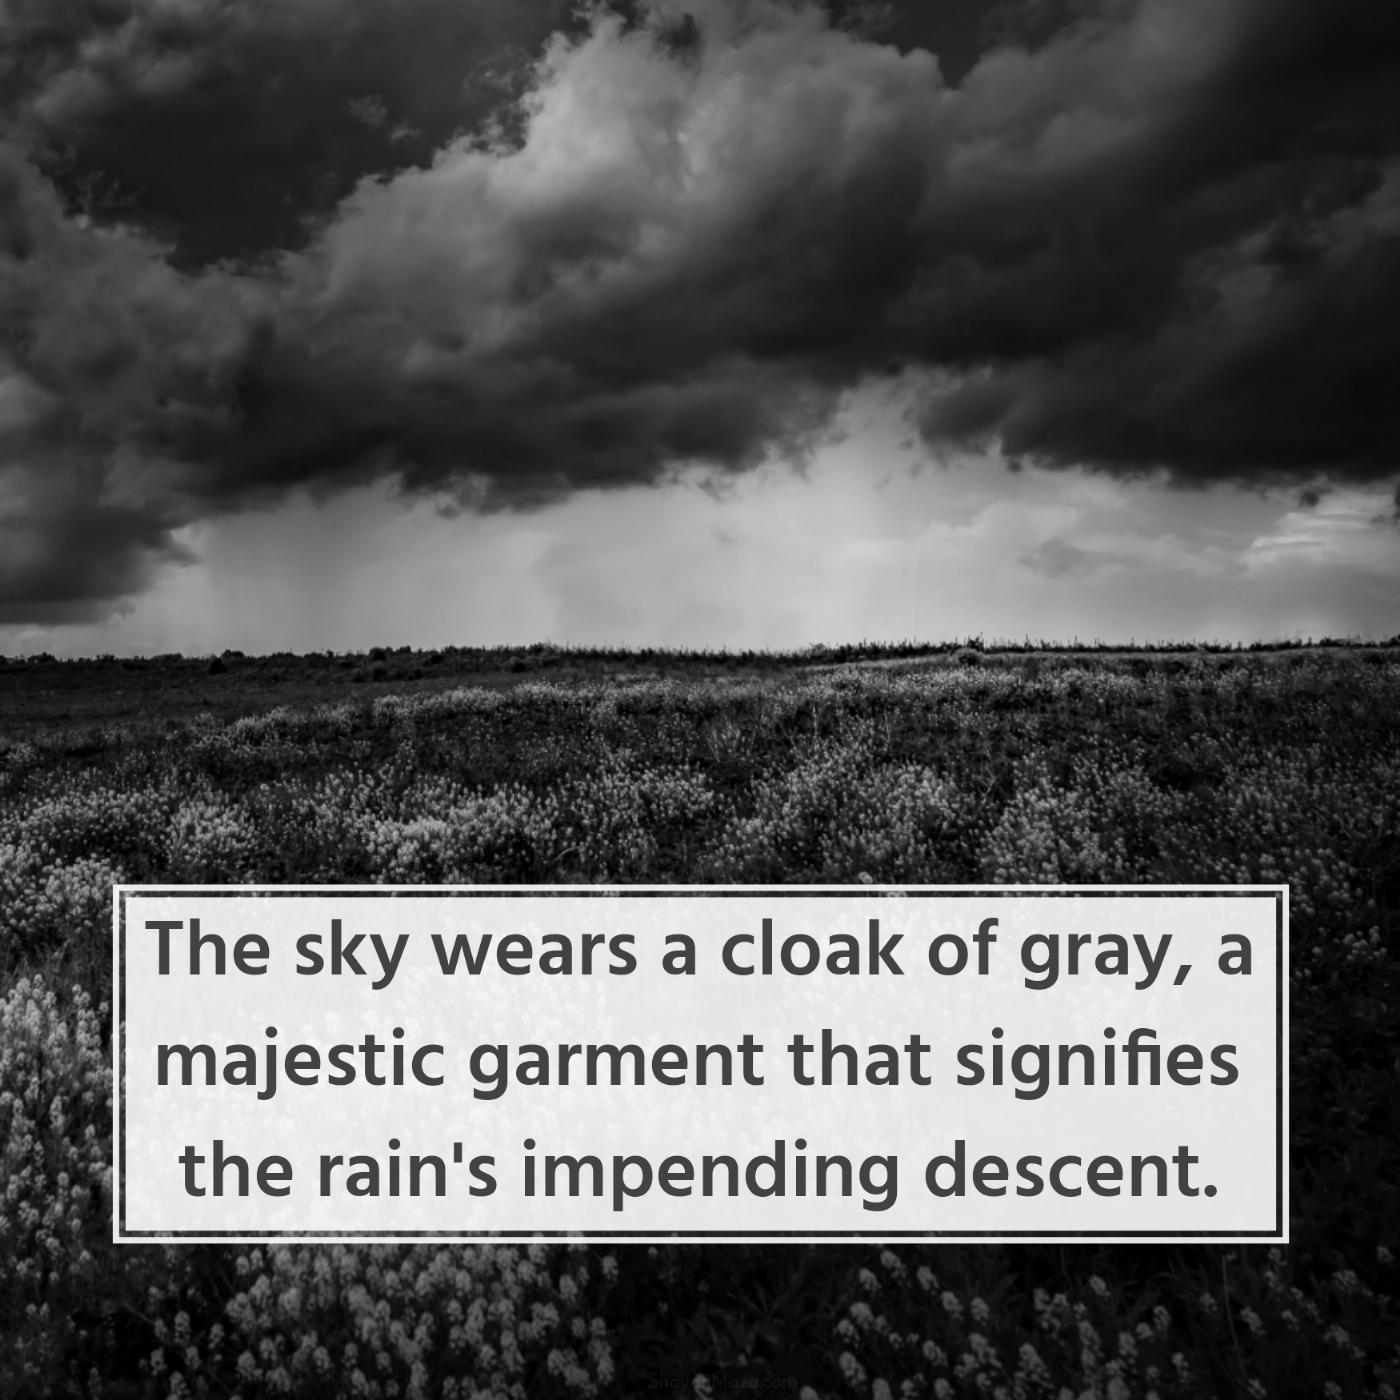 The sky wears a cloak of gray a majestic garment that signifies